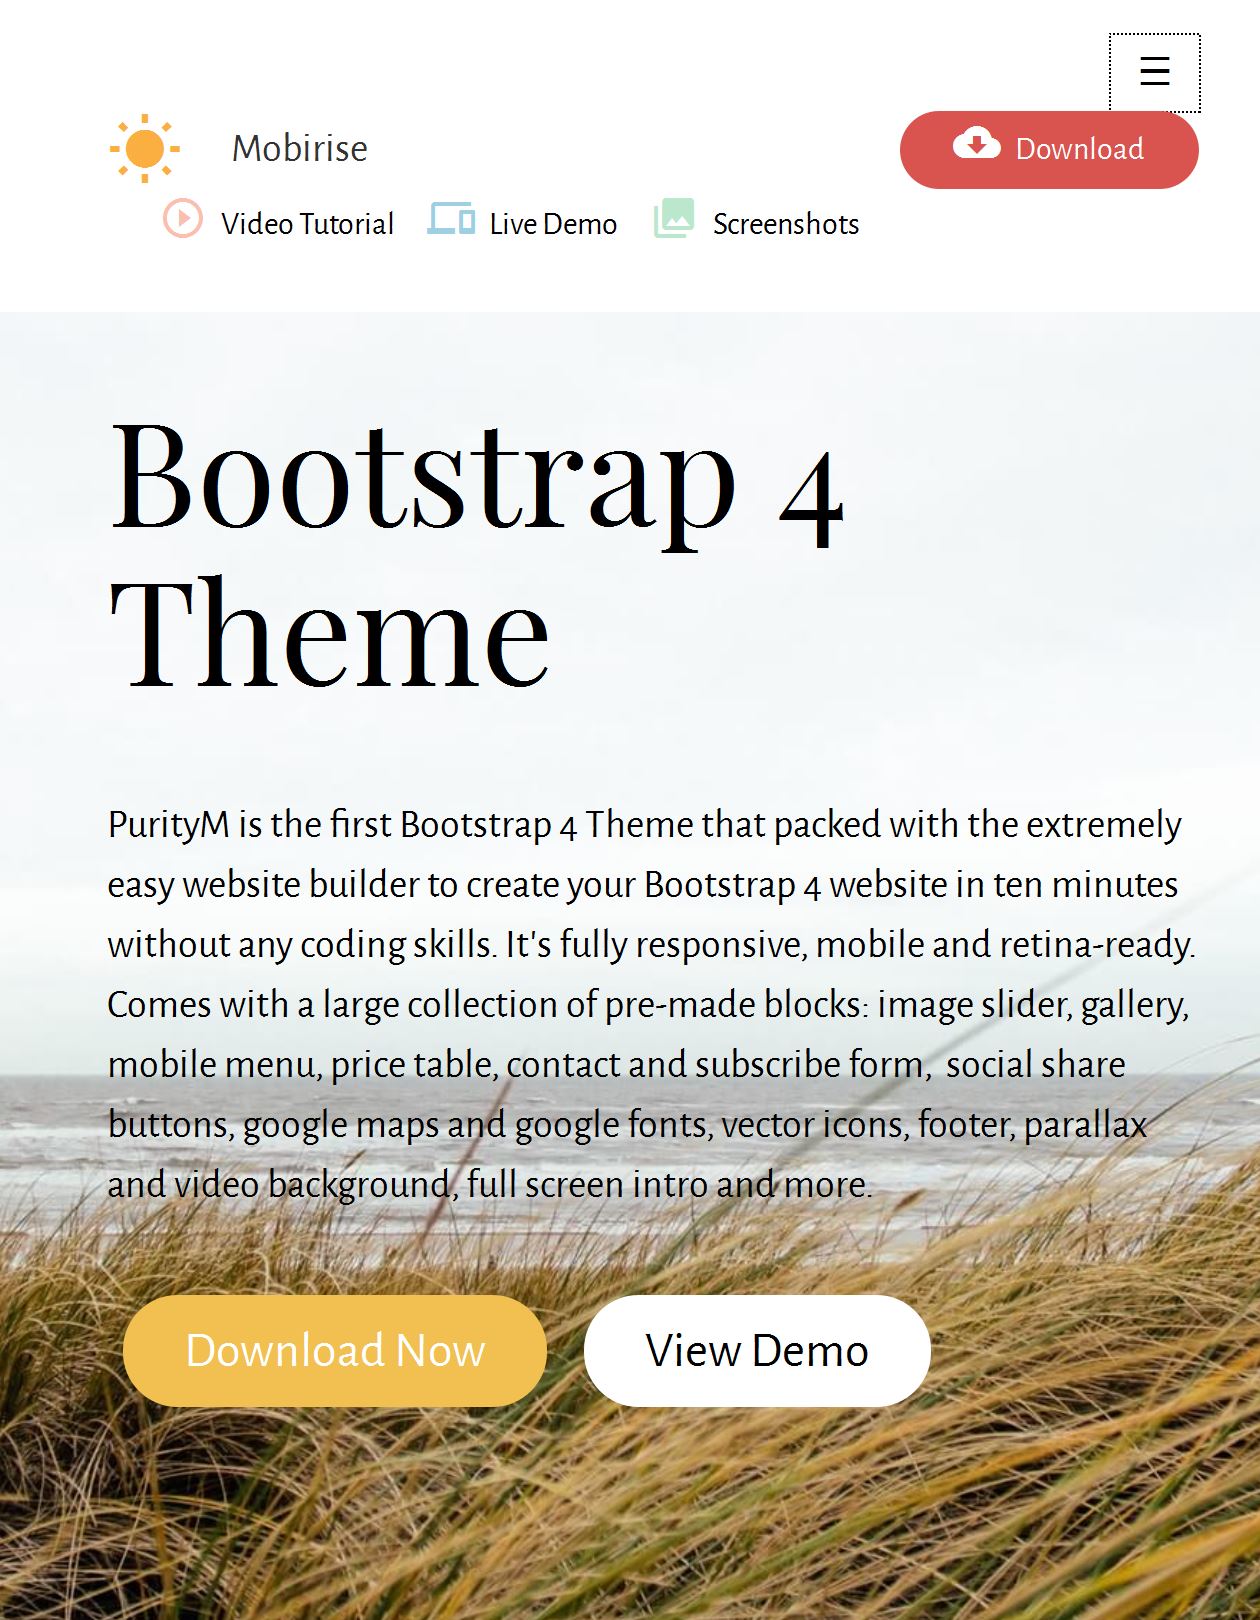 30 Free HTML5 Bootstrap Templates Of 2021 That Will Wow You